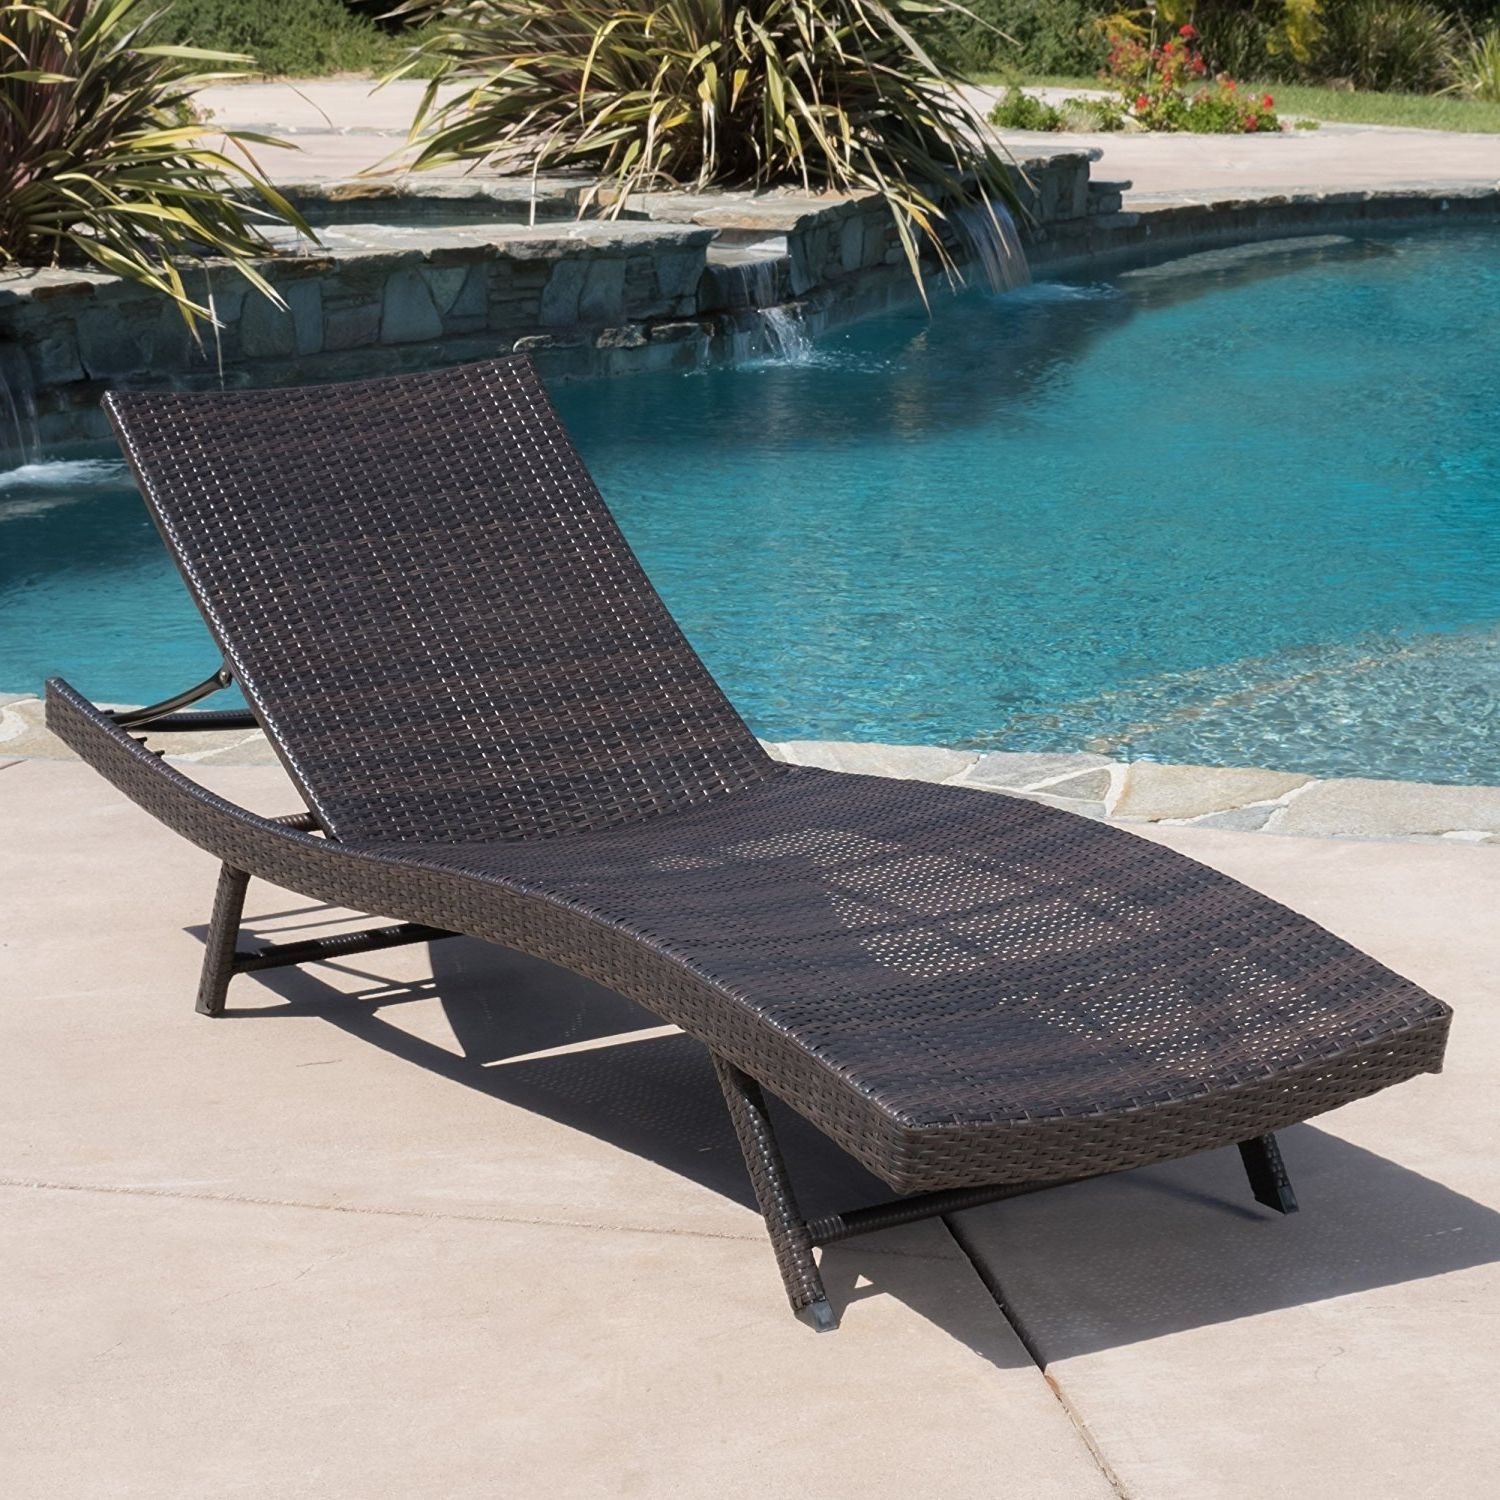 2018 Eliana Outdoor Brown Wicker Chaise Lounge Chairs Inside Amazon: Eliana Outdoor Single Brown Wicker Chaise Lounge (View 10 of 15)